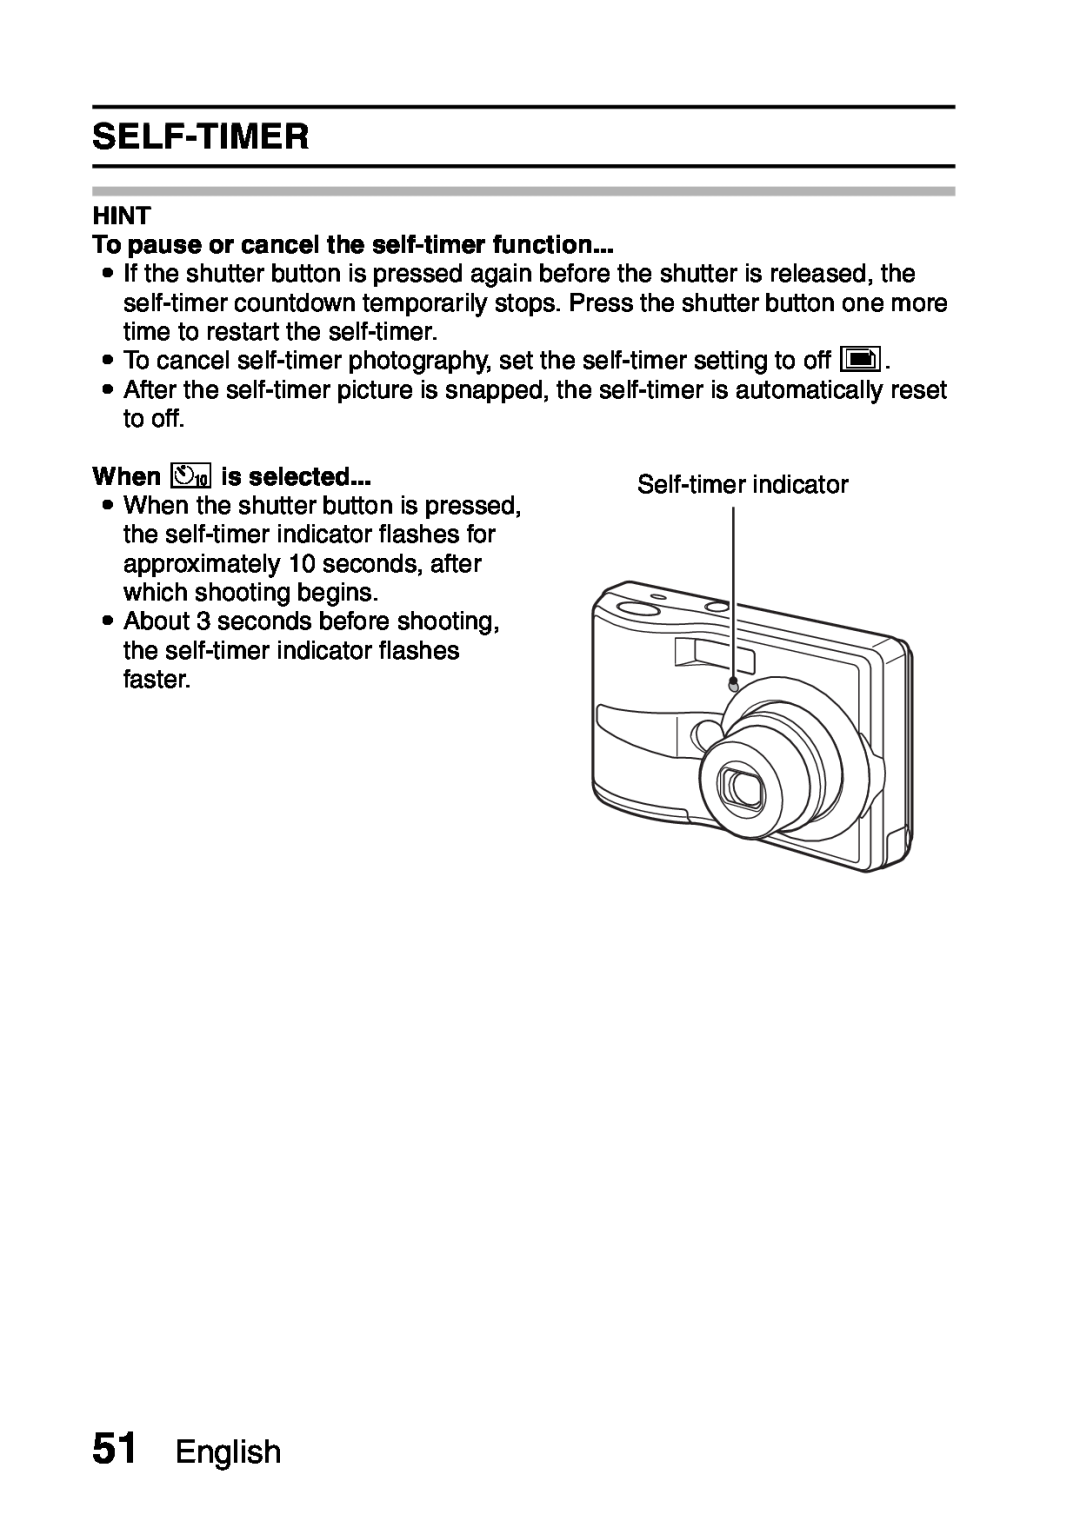 Sanyo VPC-S60 instruction manual Self-Timer, English, HINT To pause or cancel the self-timer function, When xis selected 